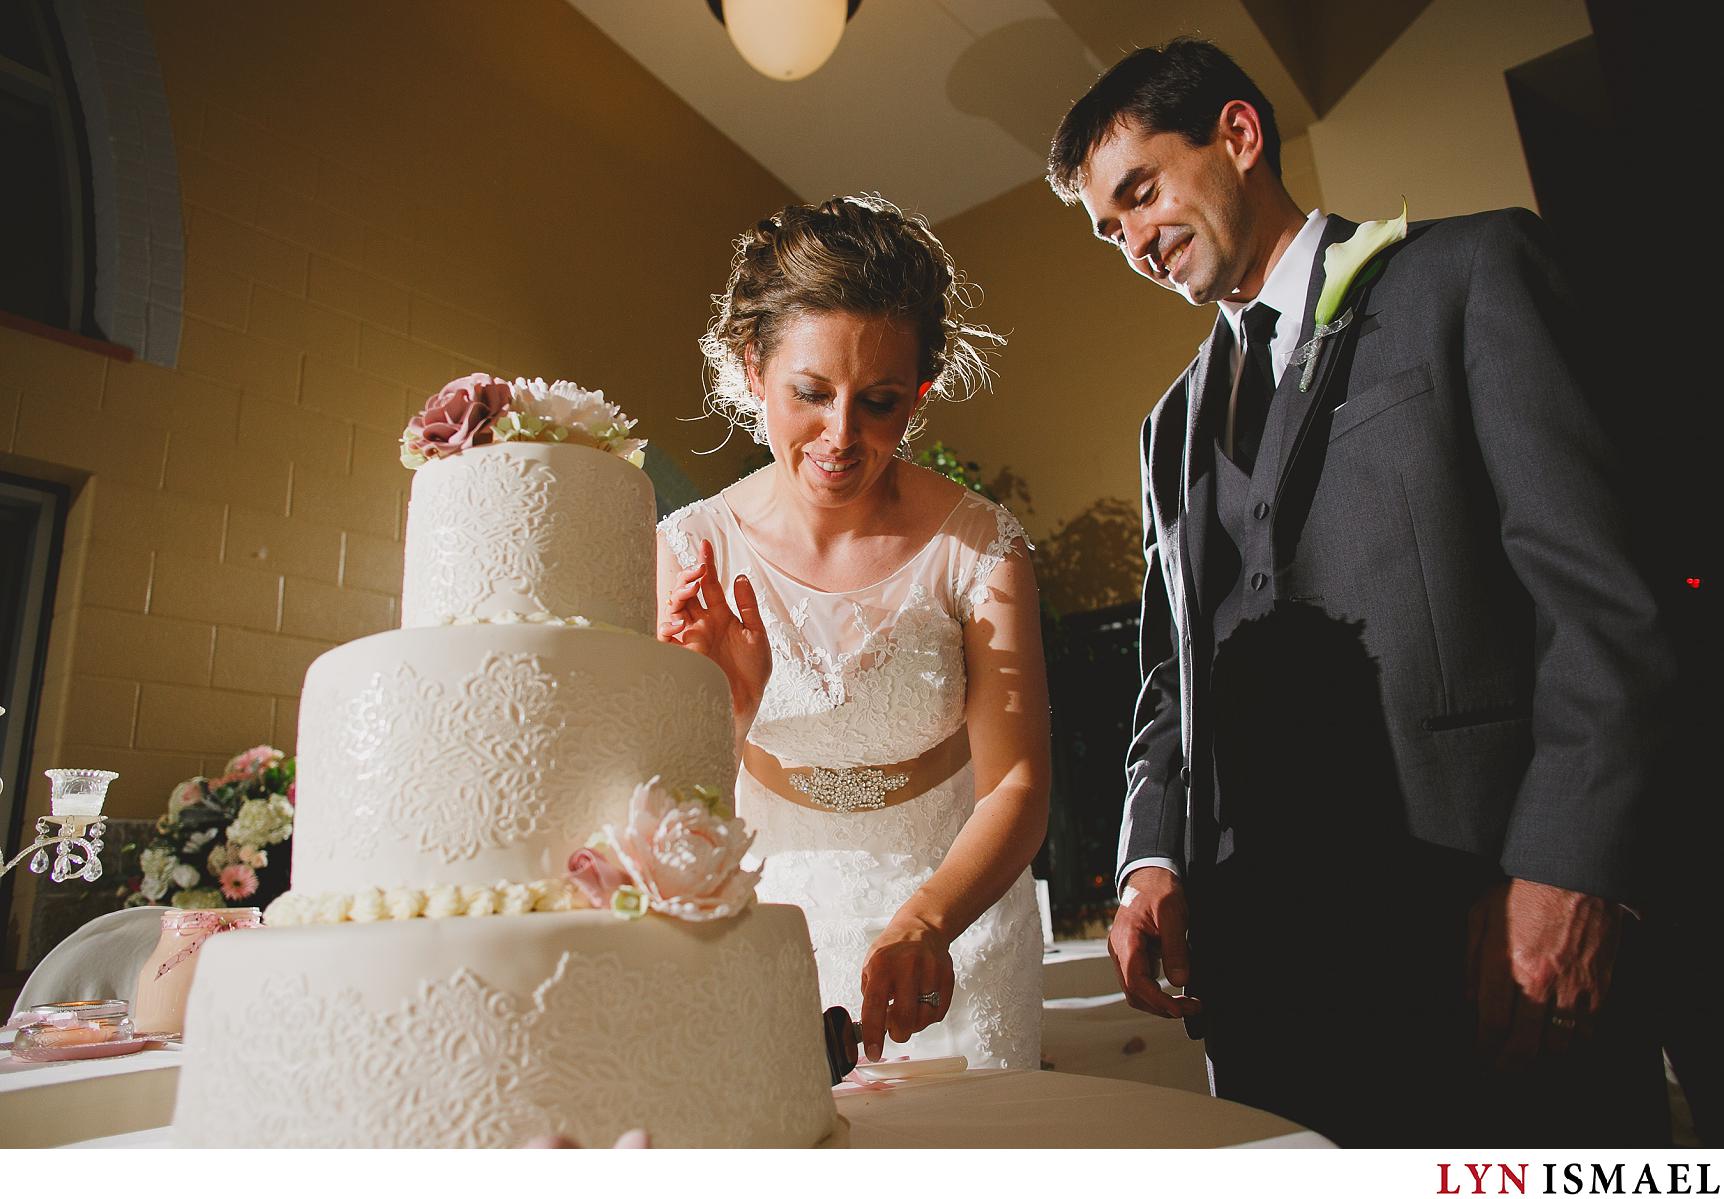 A bride and groom cuts their cake at their Stoney Creek wedding reception